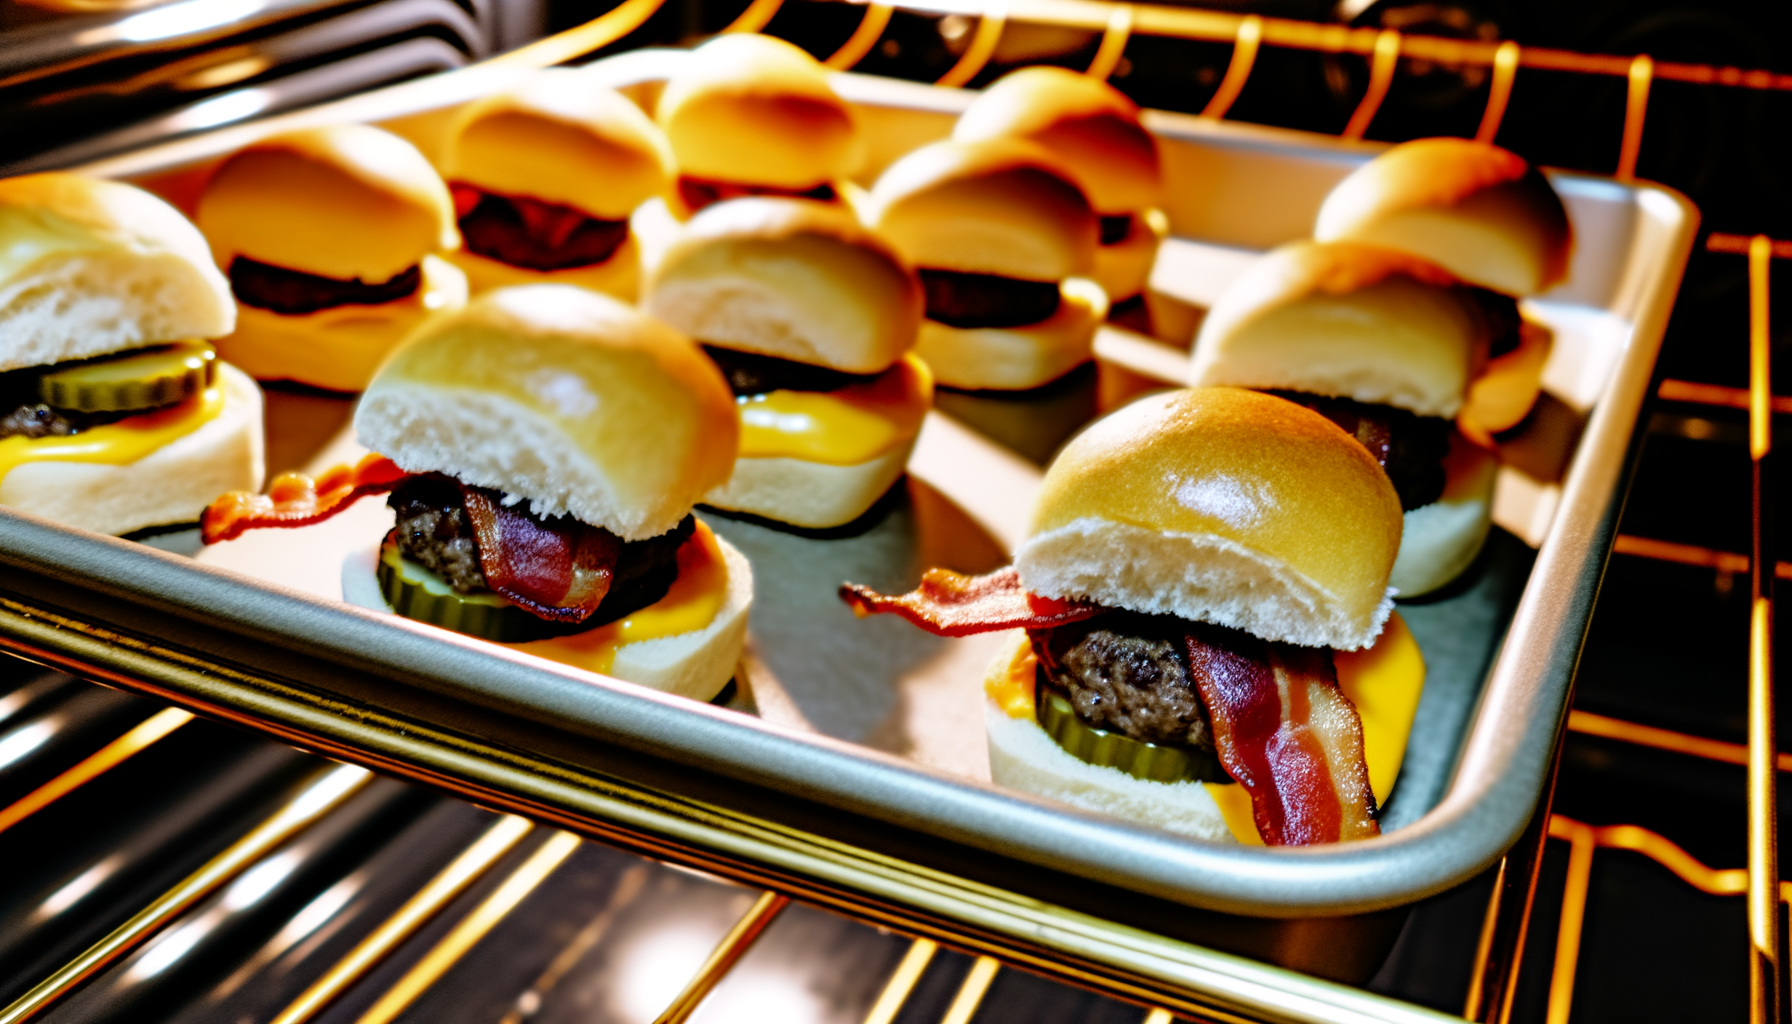 A warm ambiance surrounds a baking tray of freshly baked Bacon Cheeseburger Sliders with melted cheese, sizzling bacon atop seasoned beef within soft rolls, and a reflective oven-safe lid capturing the enticing glow of the oven.